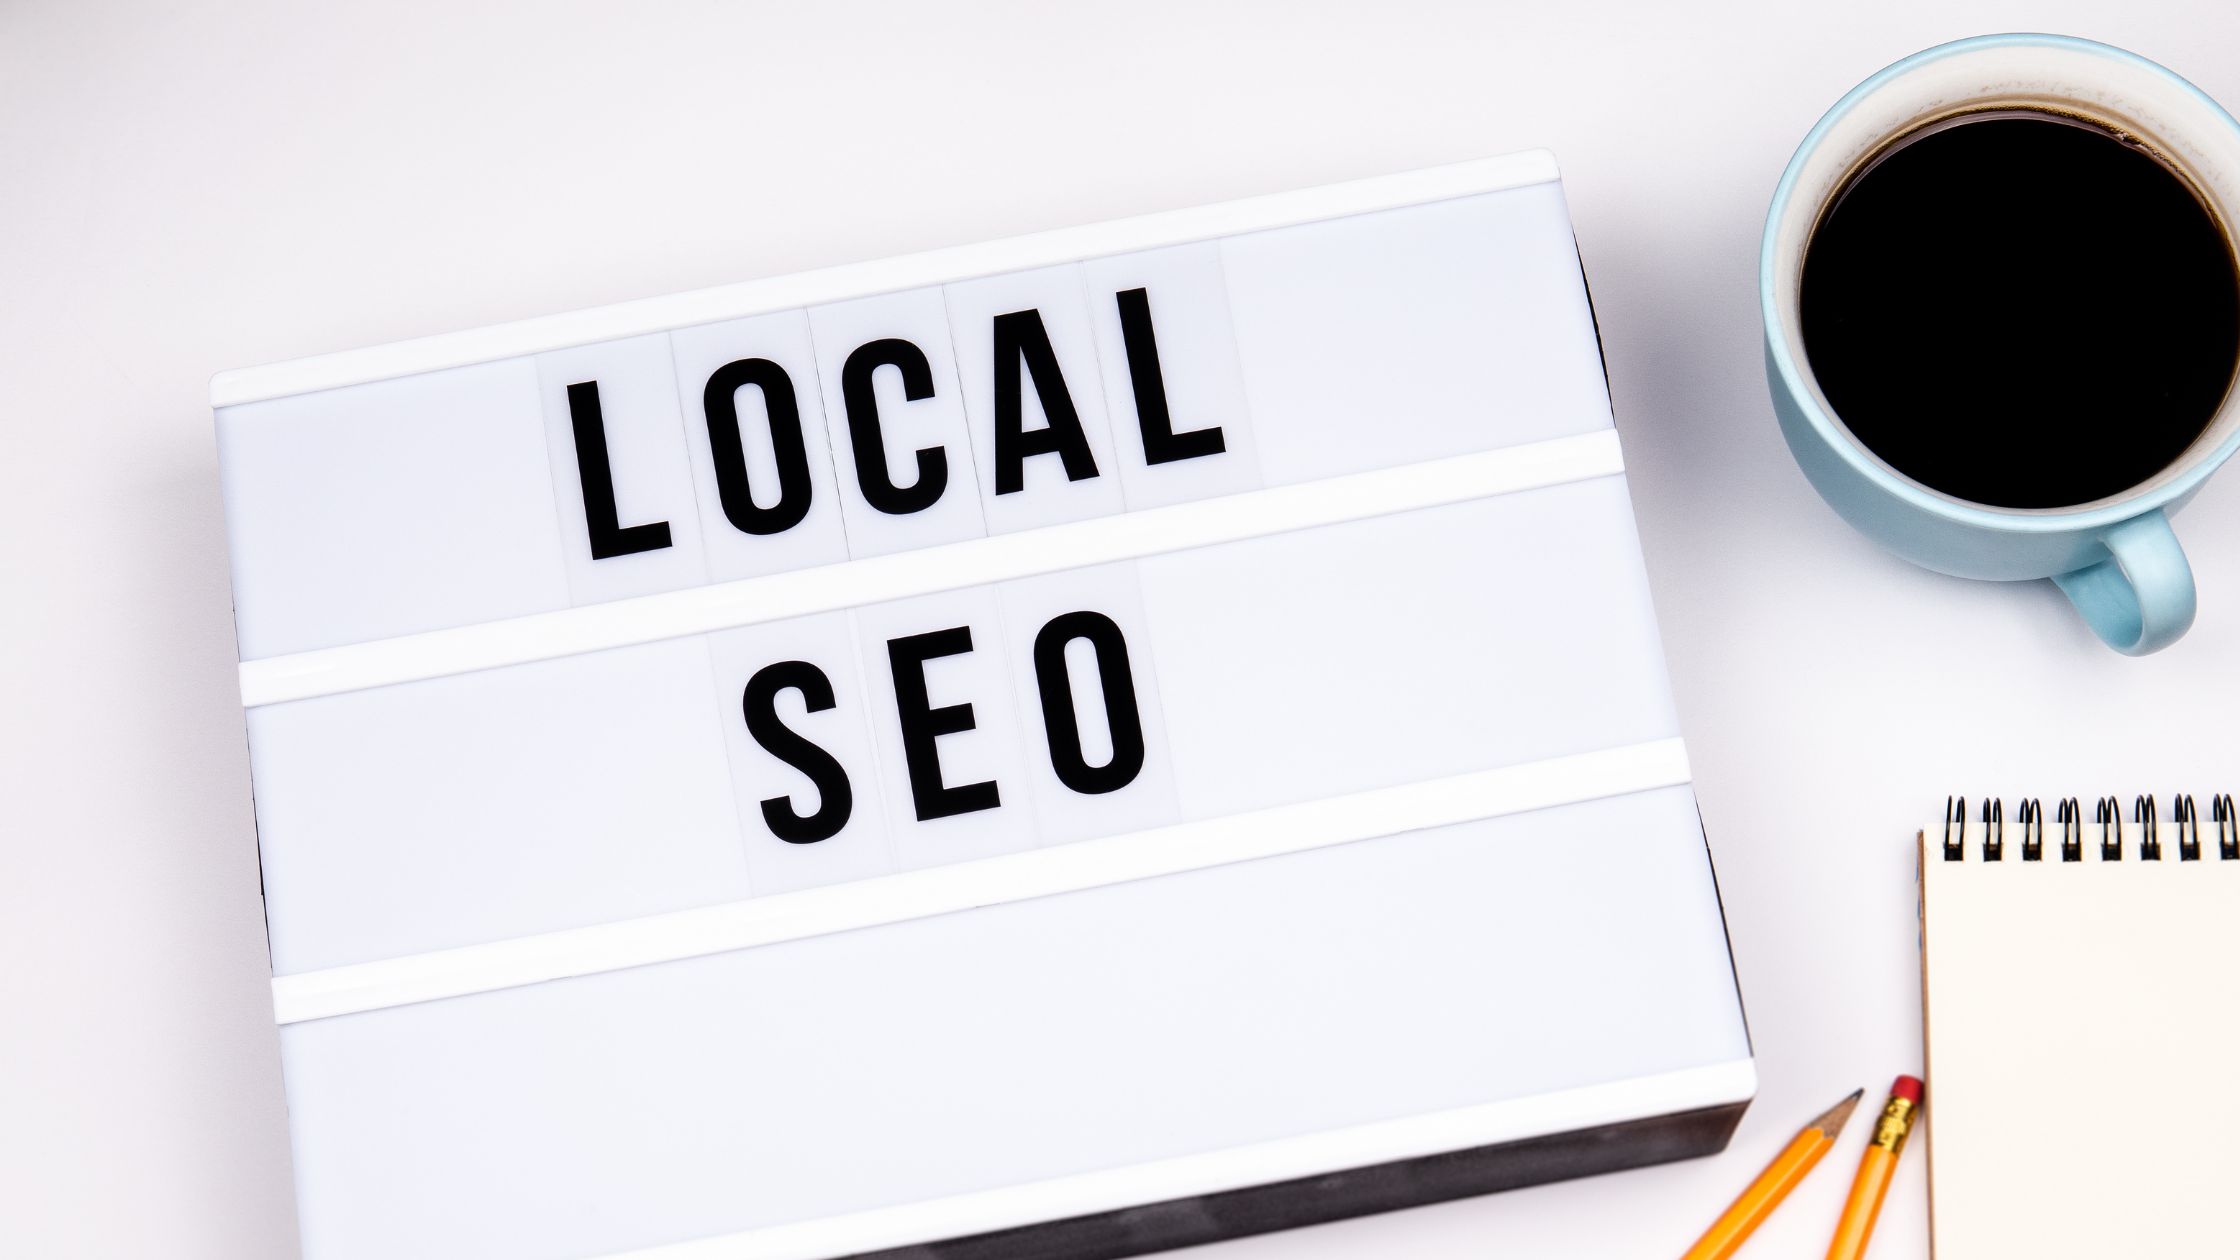 Why local SEO is important for small business